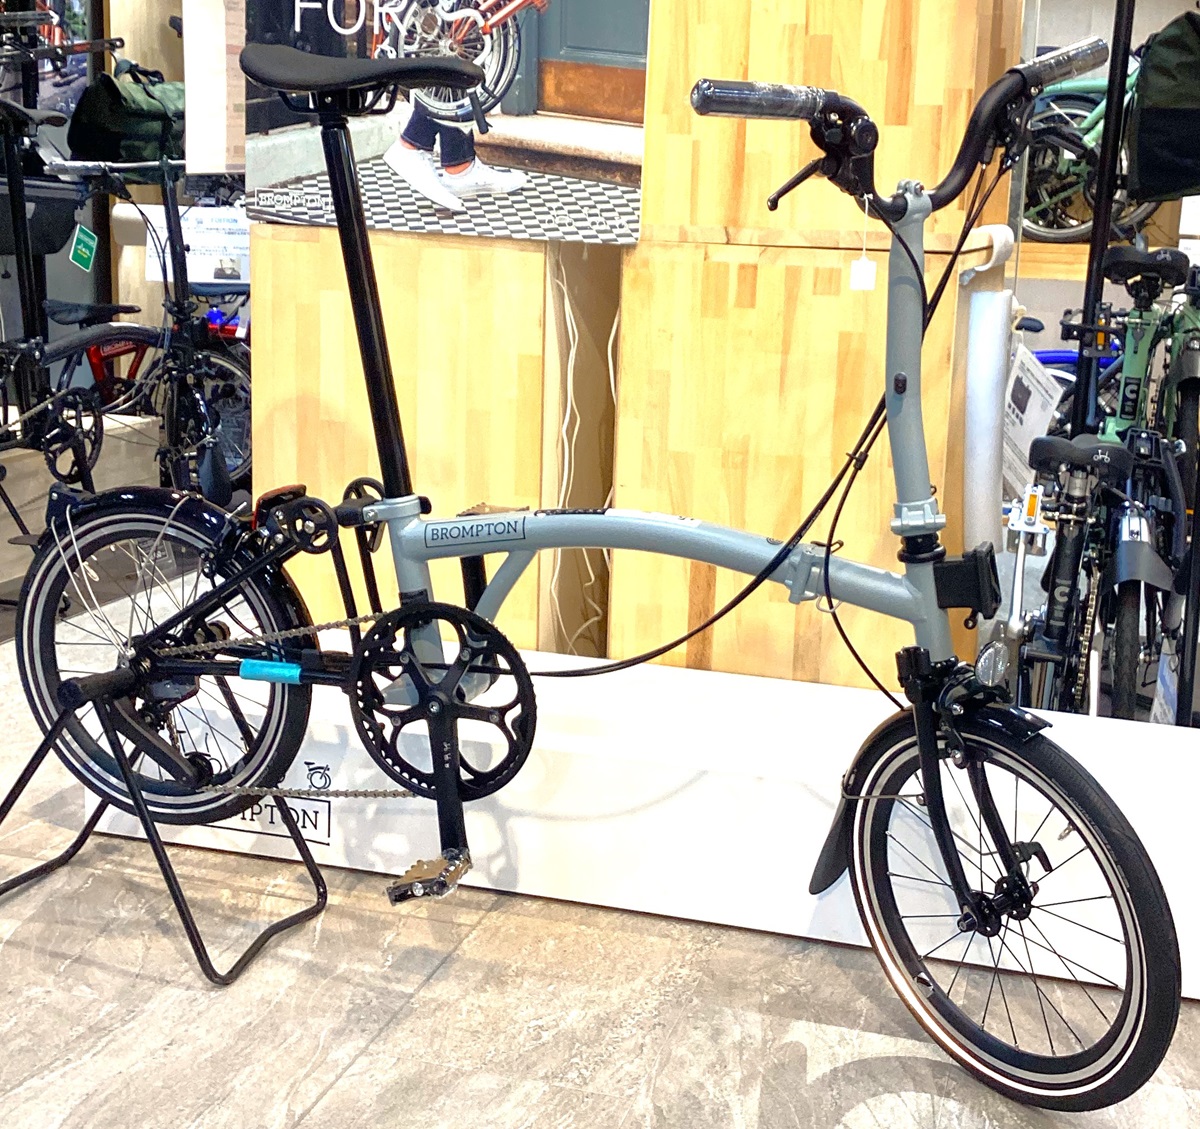 Eng.” New in store! That is a Lunar Ice one, BROMPTON P Line Urban 